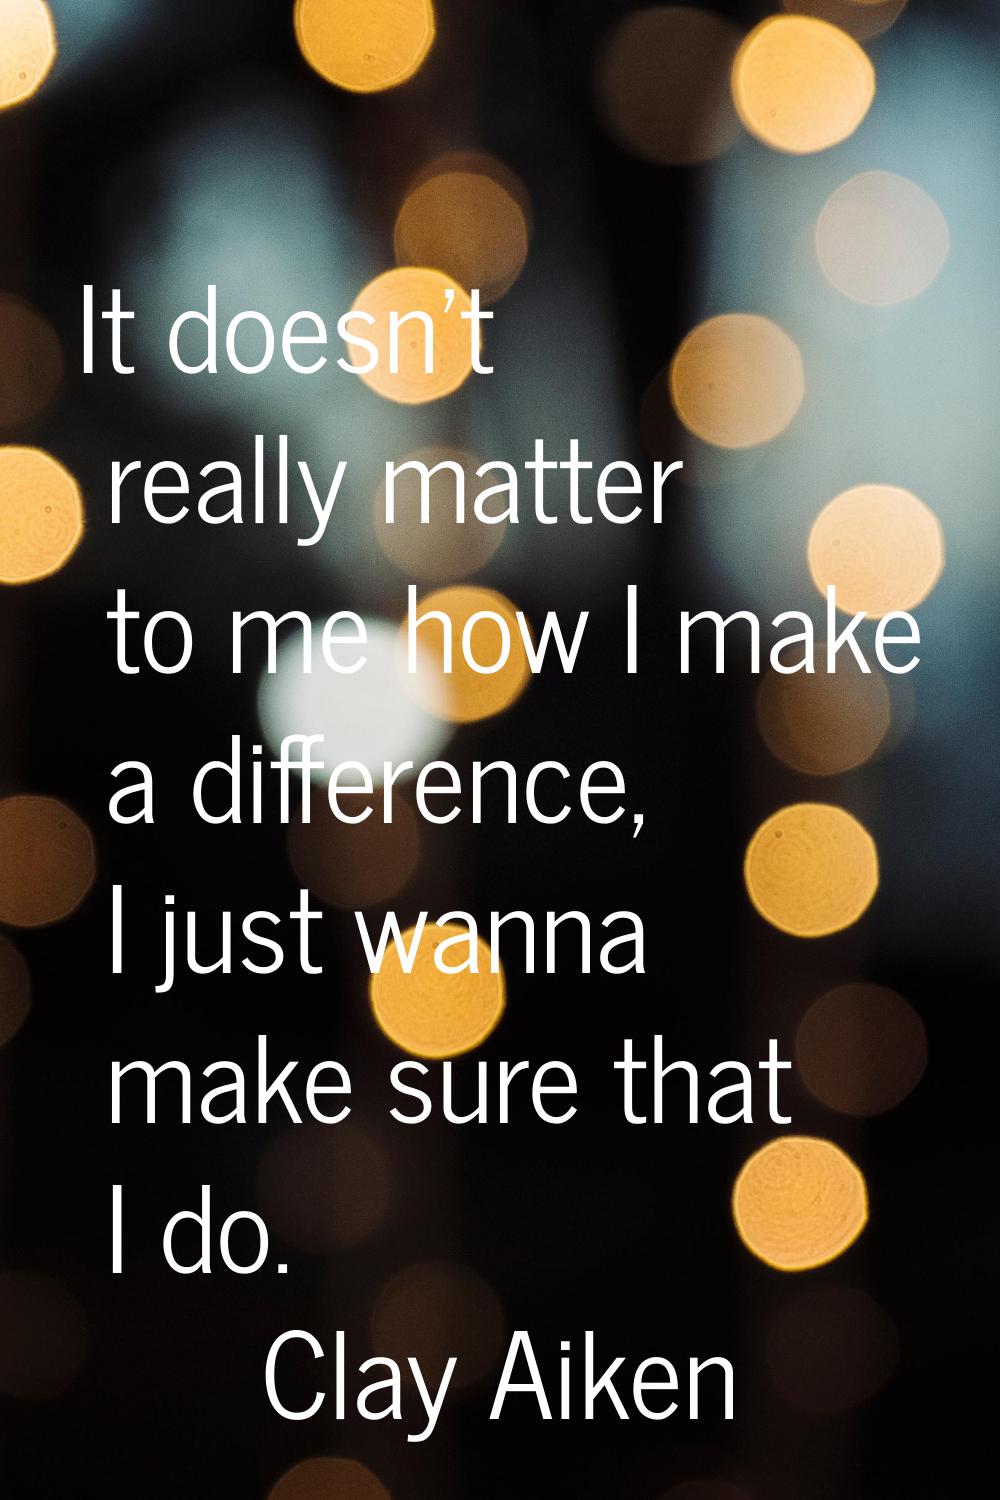 It doesn't really matter to me how I make a difference, I just wanna make sure that I do.